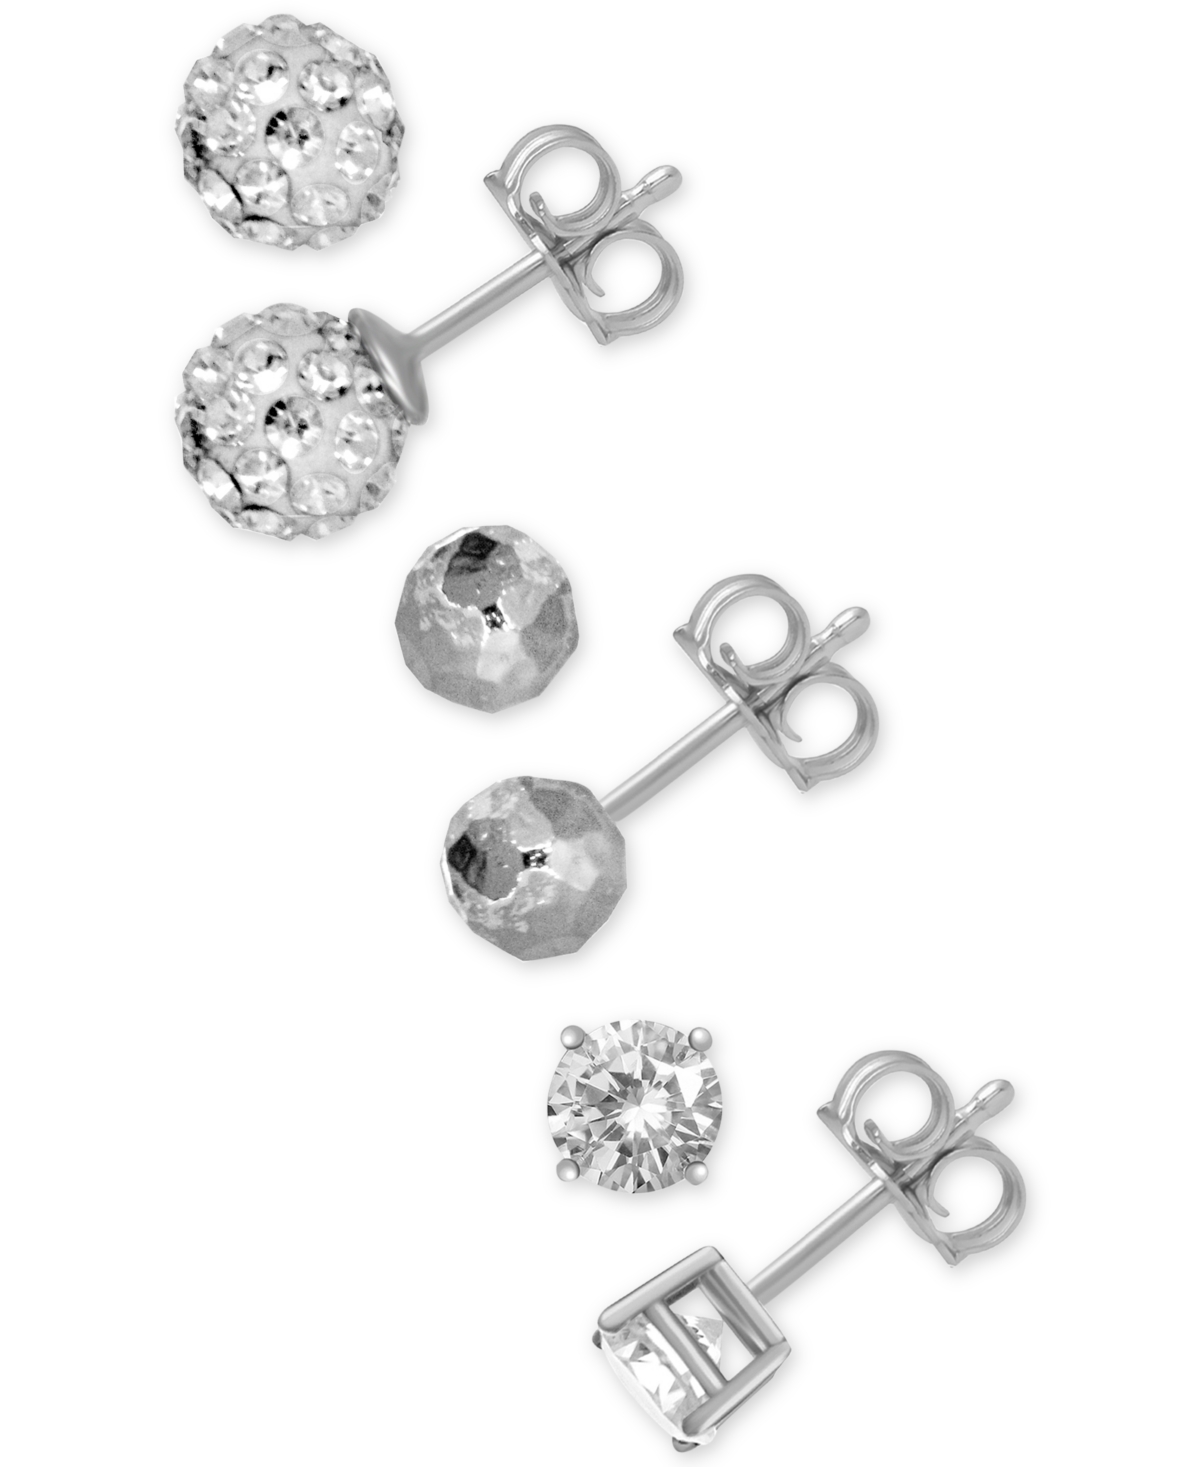 3-Pc. Set Cubic Zirconia, Hammered-Look and Crystal Ball Stud Earrings in Silver-Plate - Silver